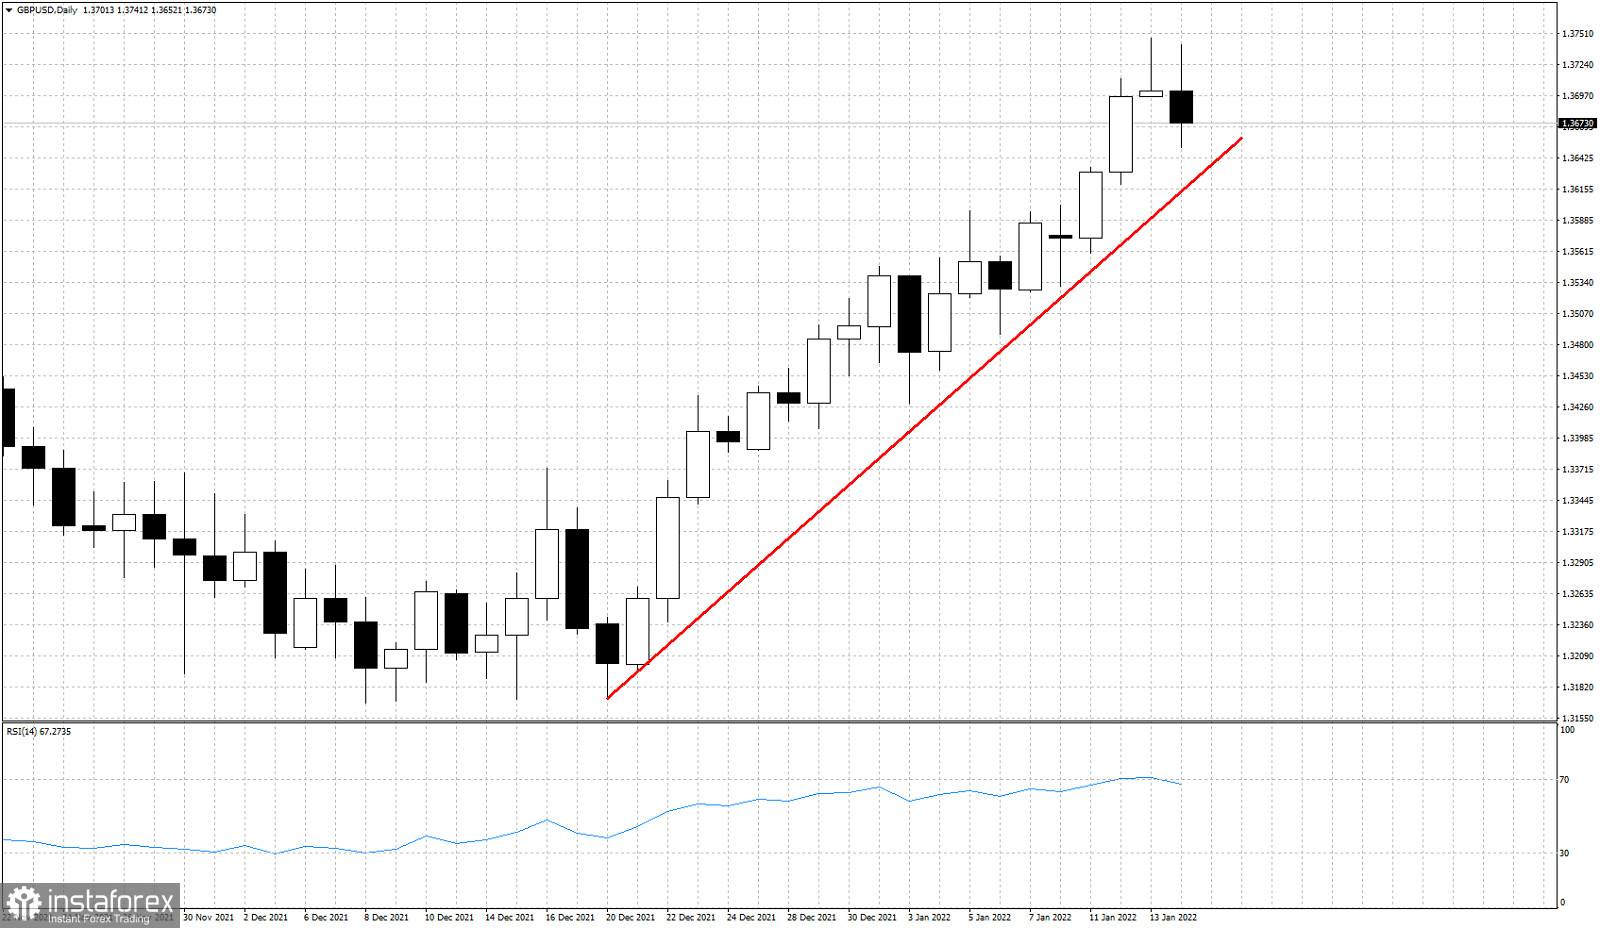 Bearish candlestick formation in GBPUSD.